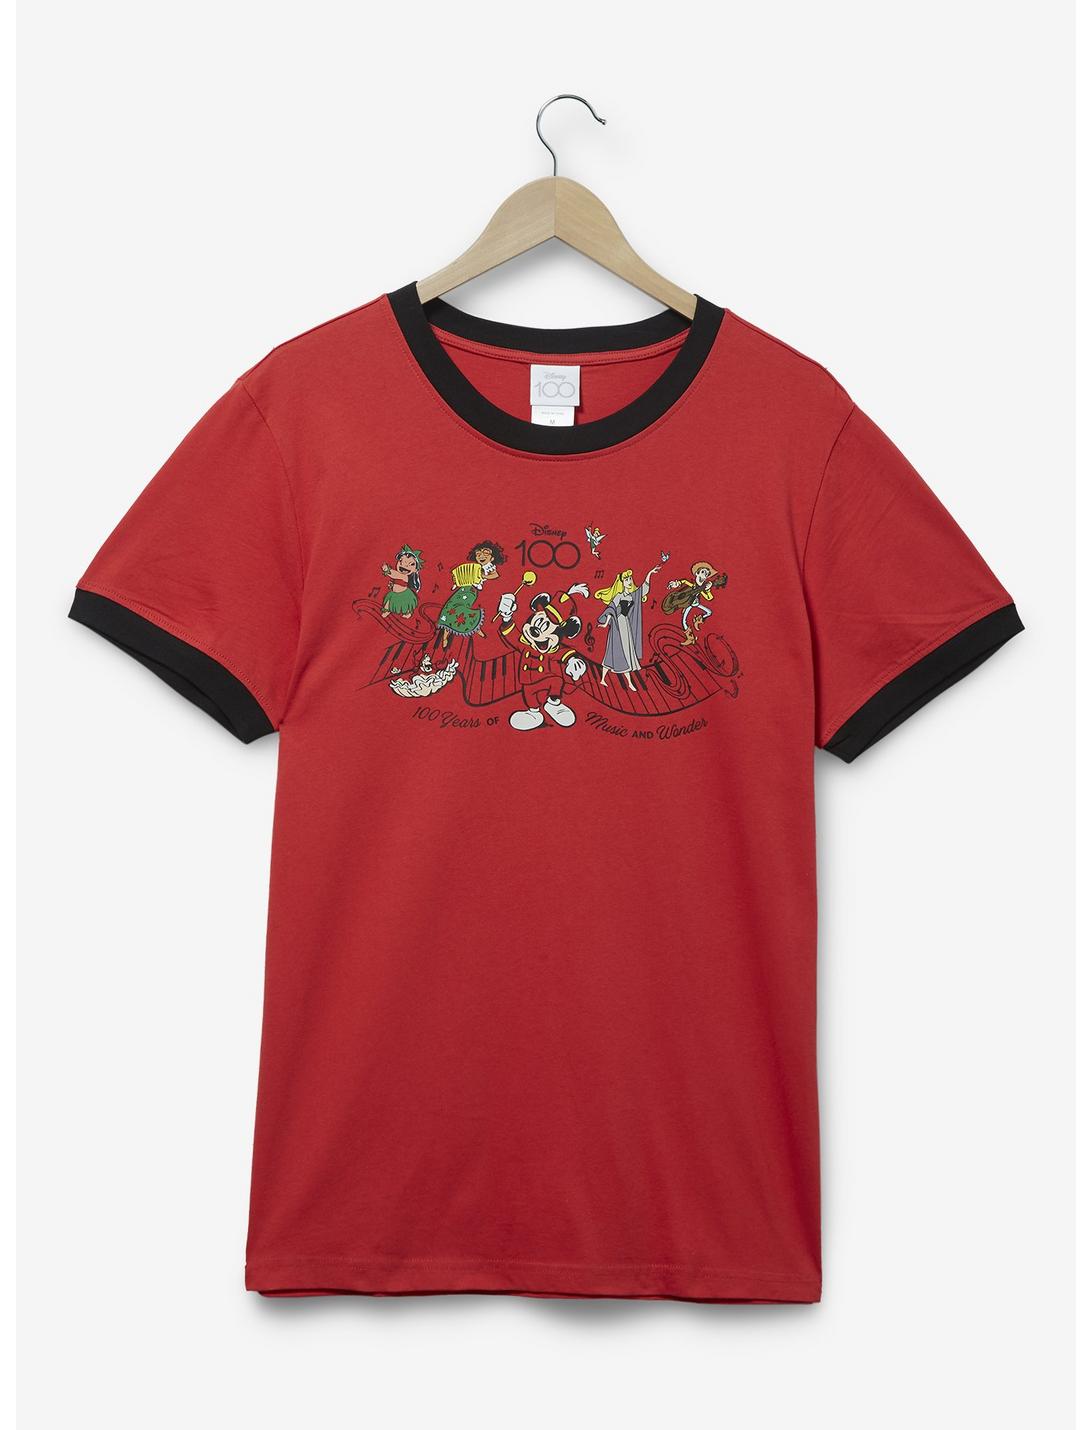 Disney 100 Musical Characters Ringer T-Shirt - BoxLunch Exclusive, RED, hi-res